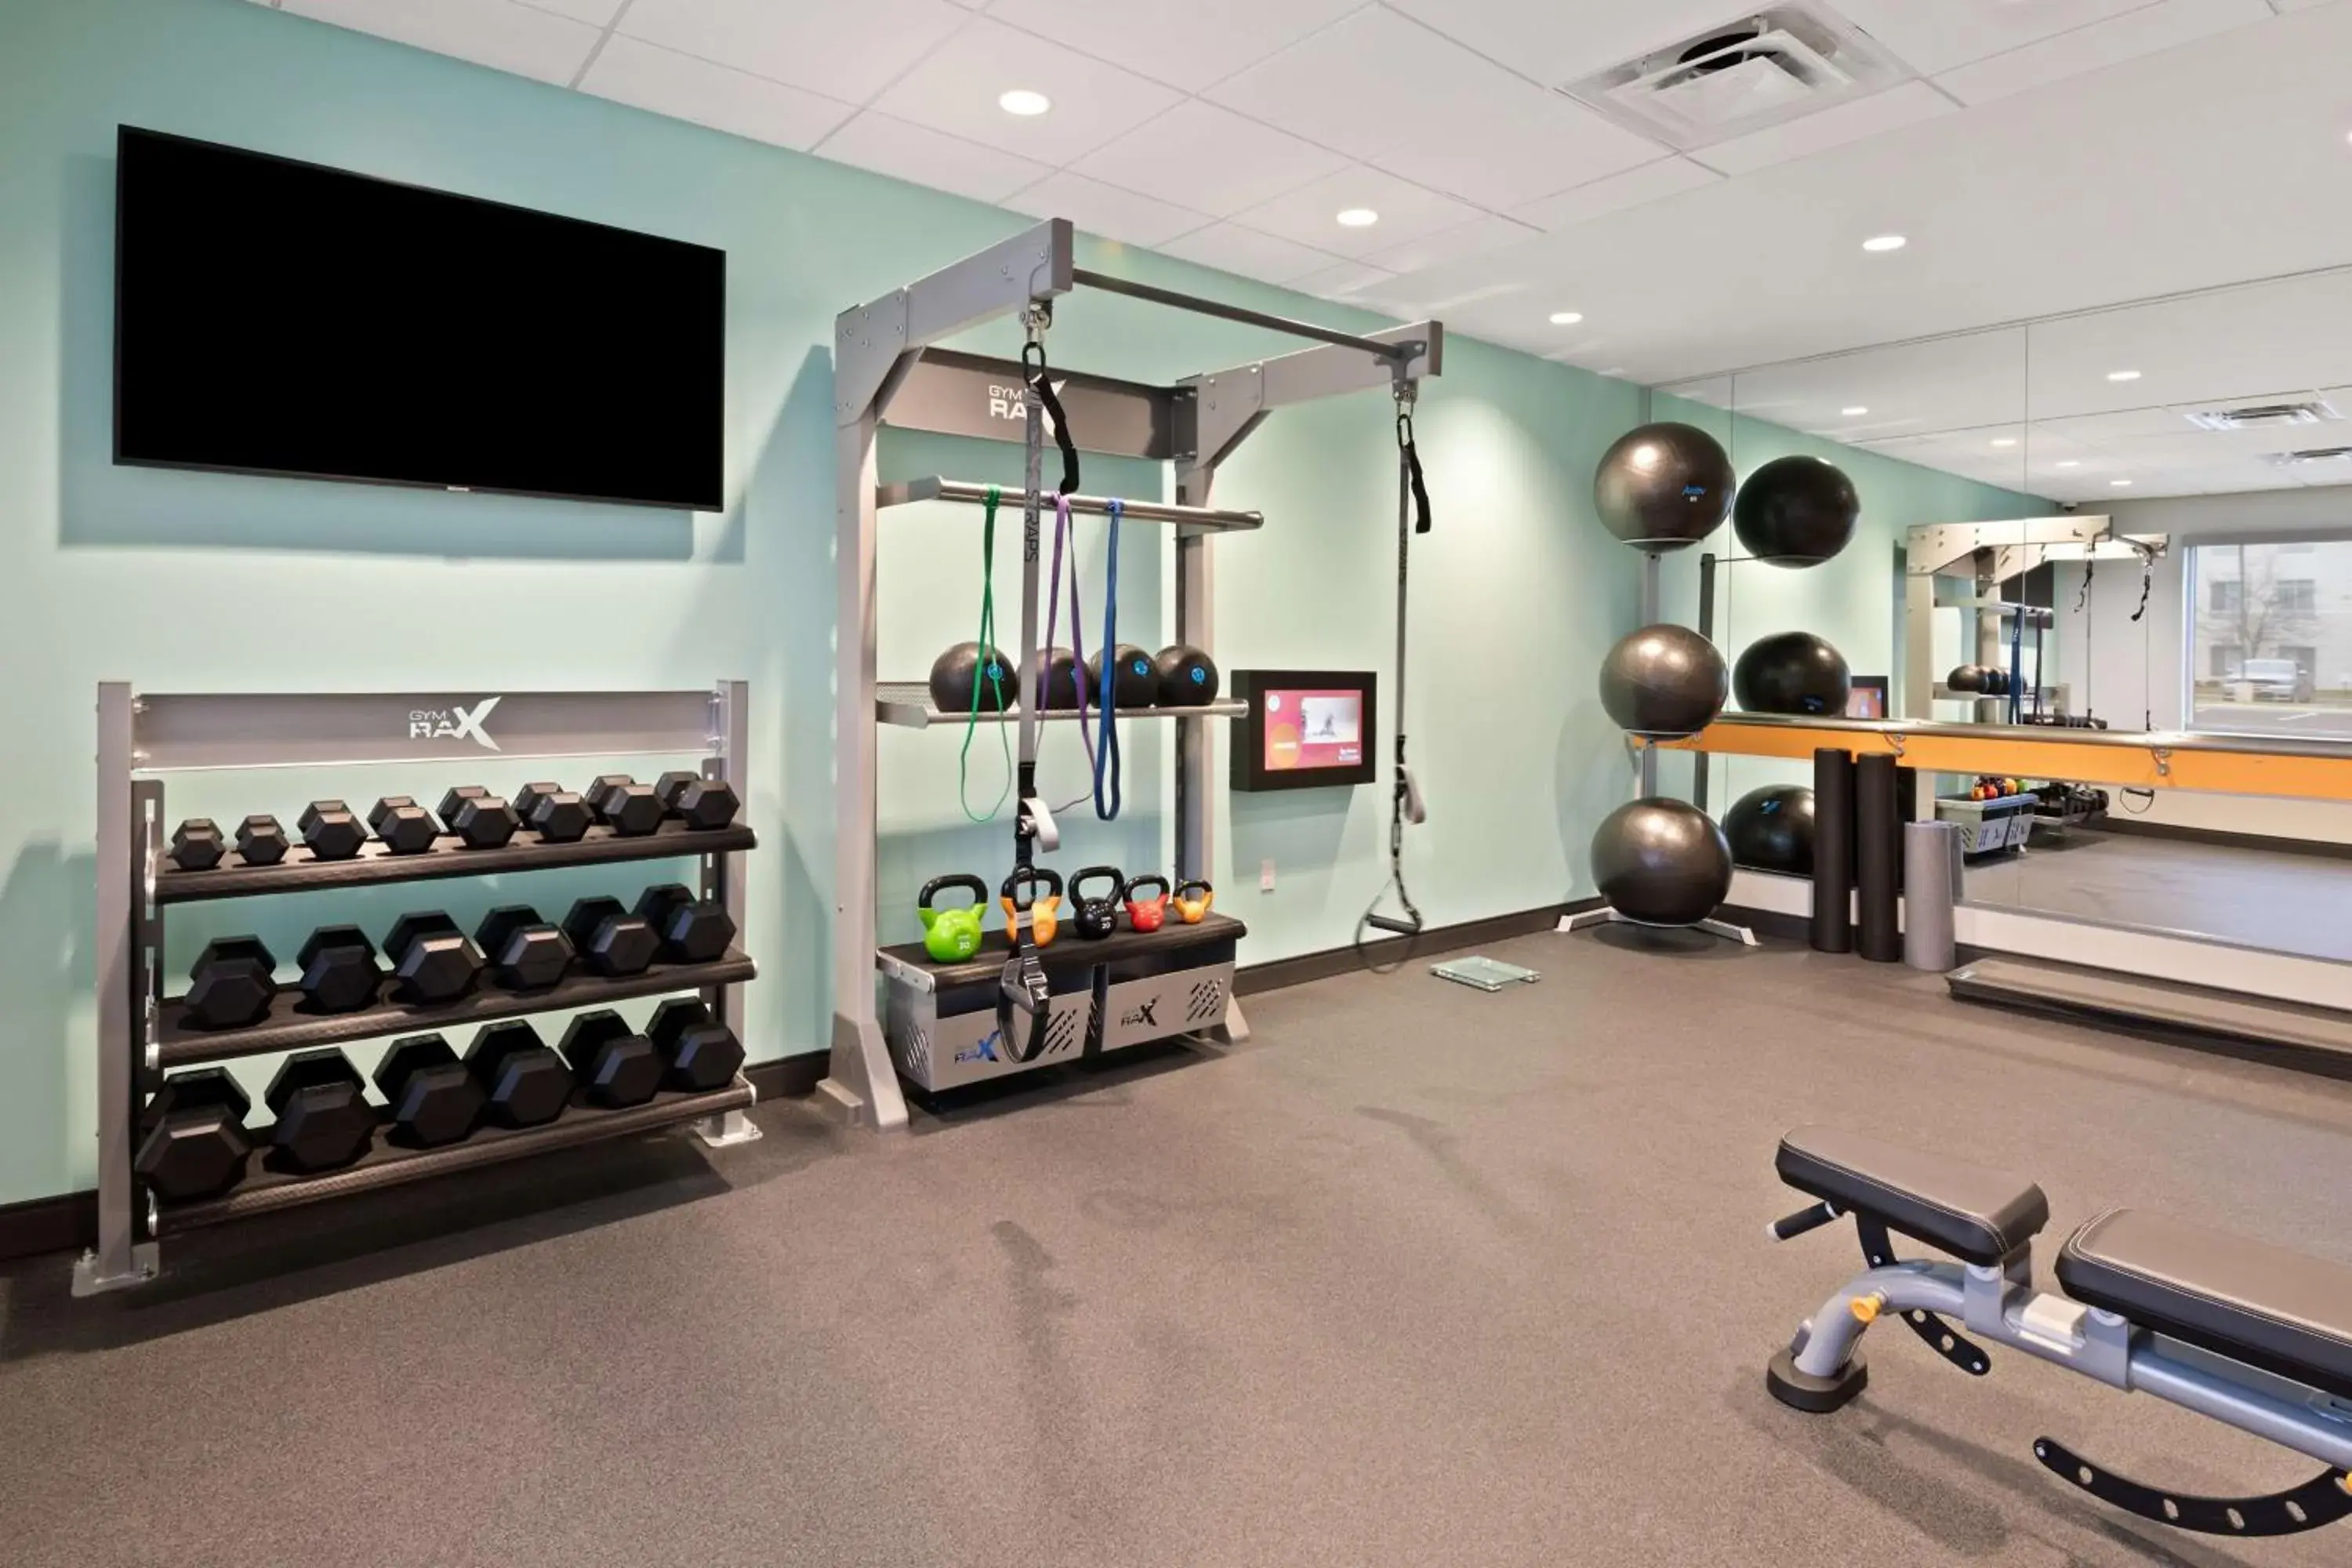 Fitness centre/facilities, Fitness Center/Facilities in Tru by Hilton Sharonville, OH